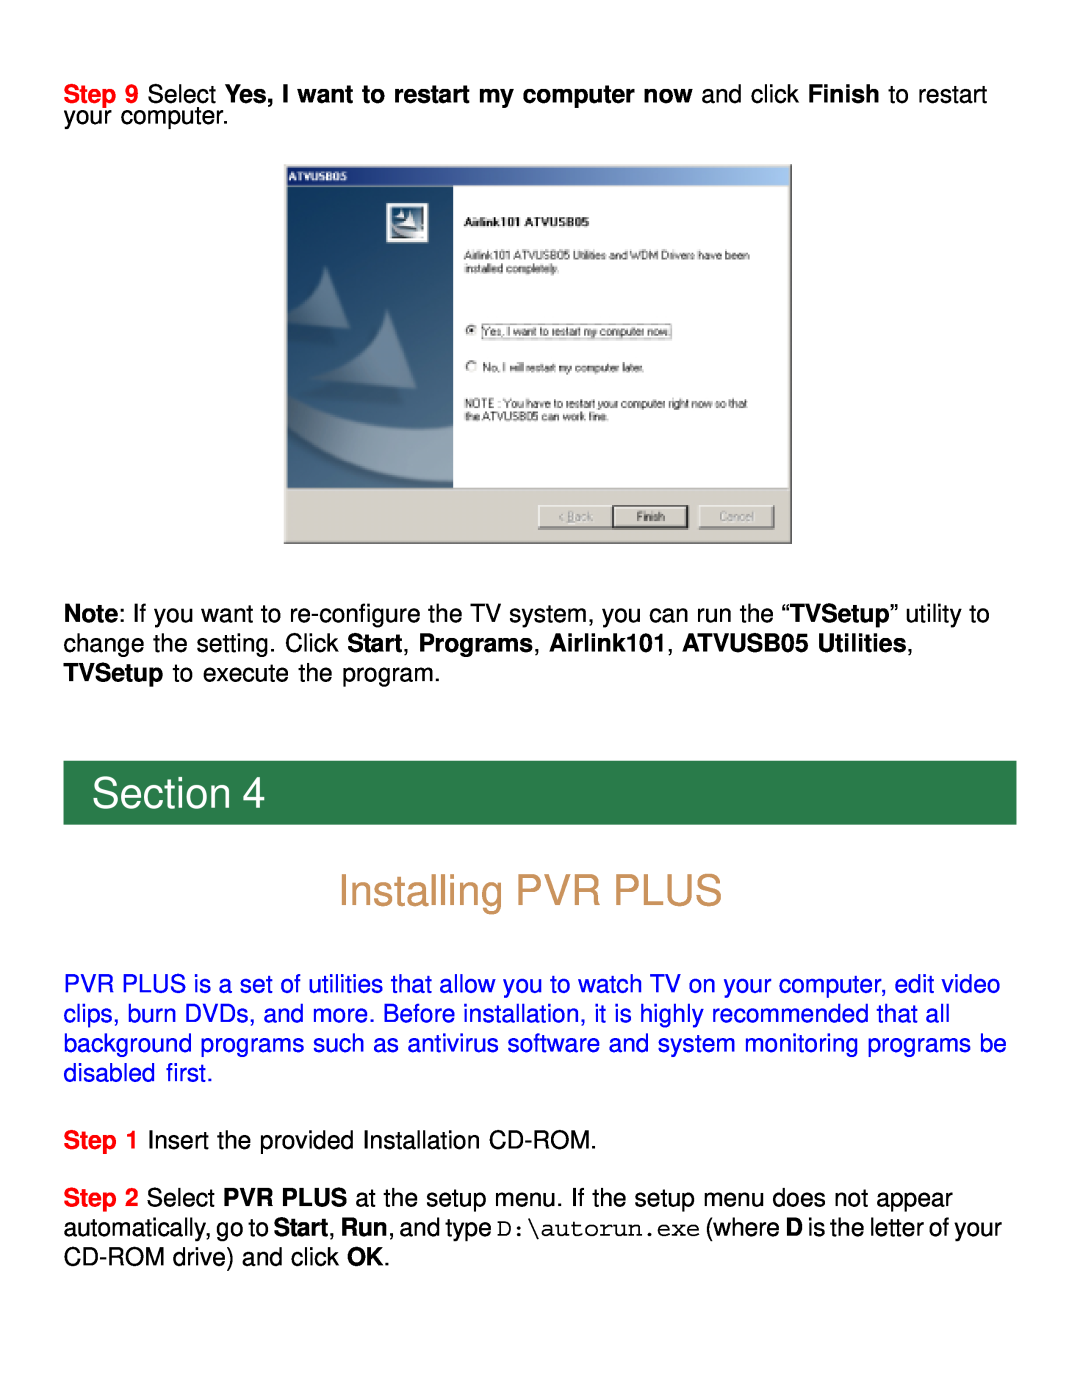 Airlink101 ATVUSB05 manual Installing PVR PLUS, Section 